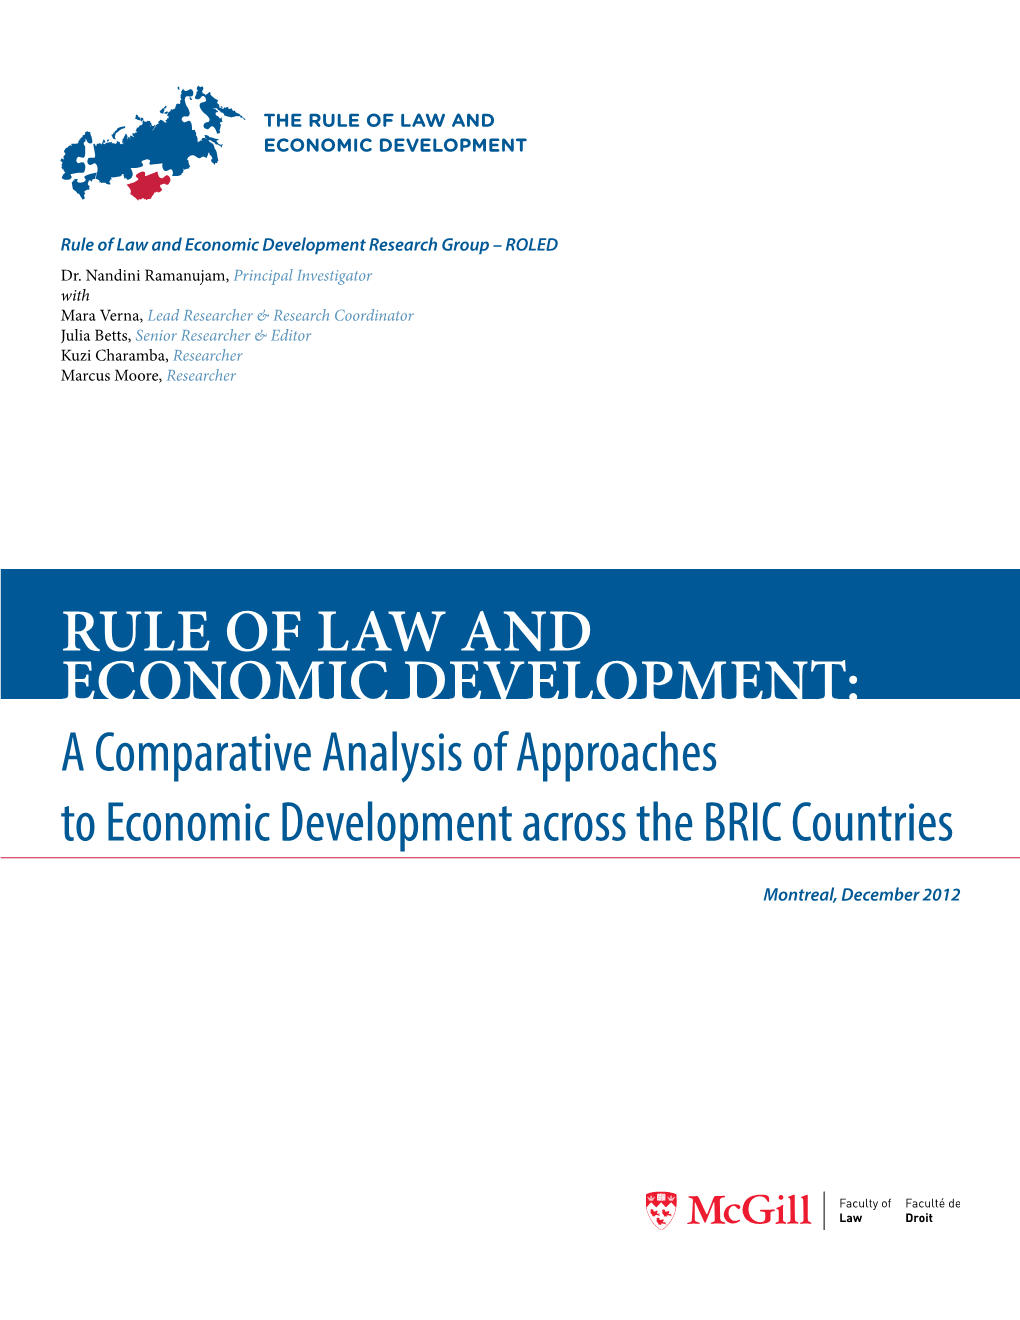 Rule of Law and Economic Development: a Comparative Analysis of Approaches to Economic Development Across the BRIC Countries